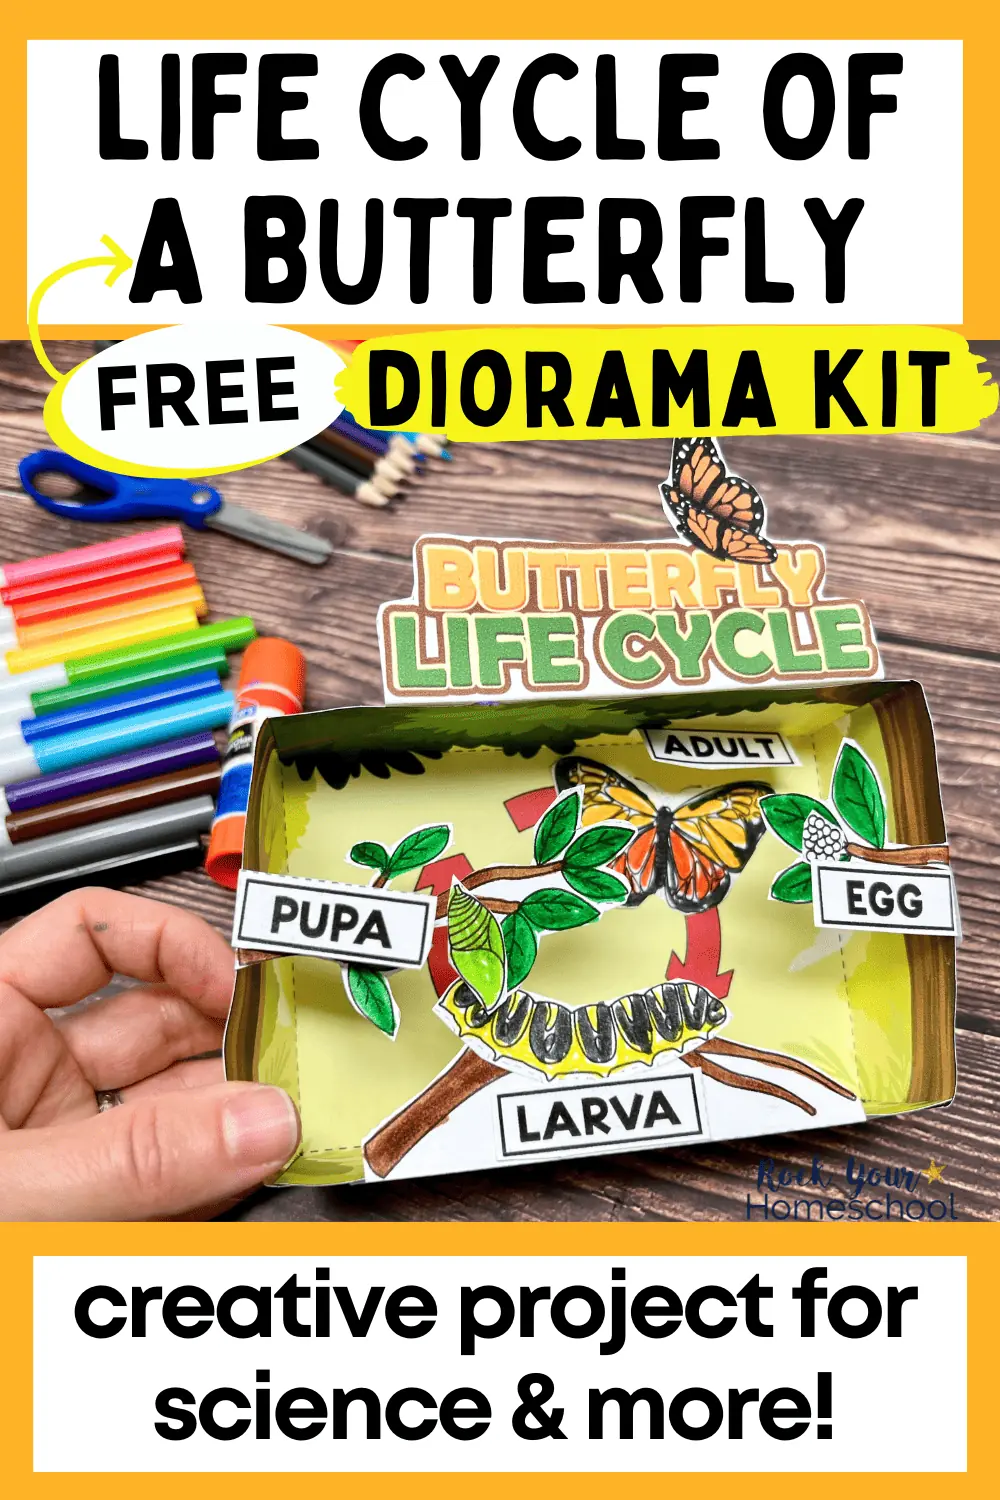 Life Cycle of a Butterfly Project: How to Make this 3D Diorama (Free)